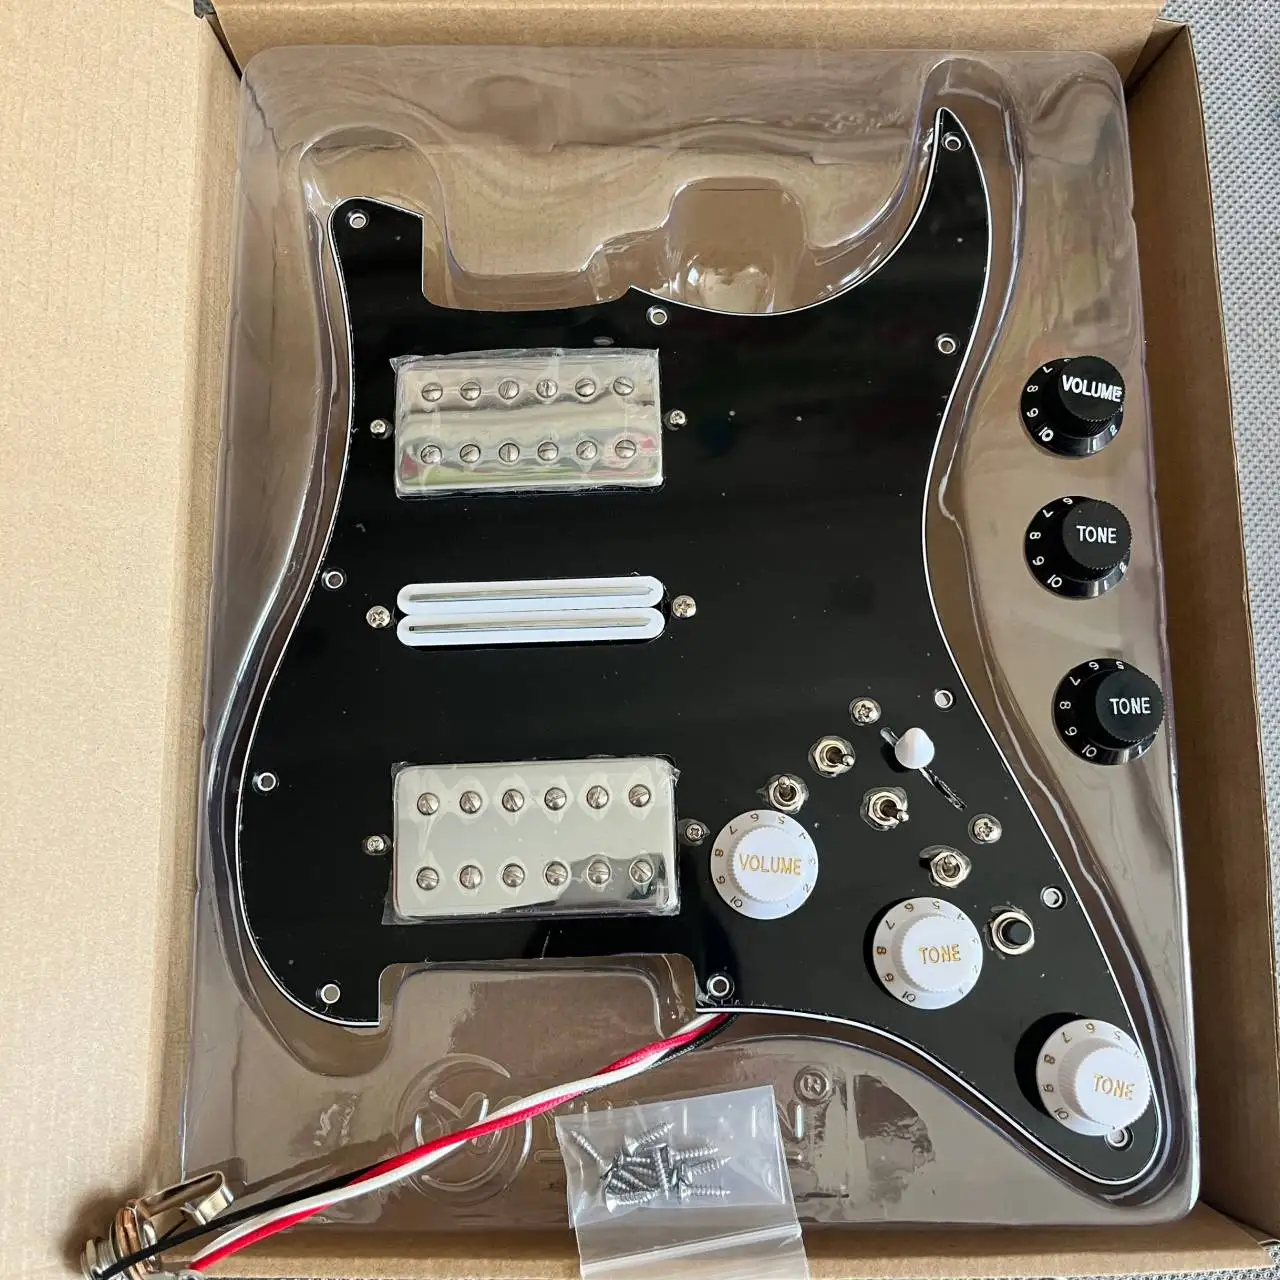 

HSH Prewired Pickguard set Loaded Alnico V Humbucker Pickups Coil Split Multifution Switch 7 Way Toggle For ST Style Guitar